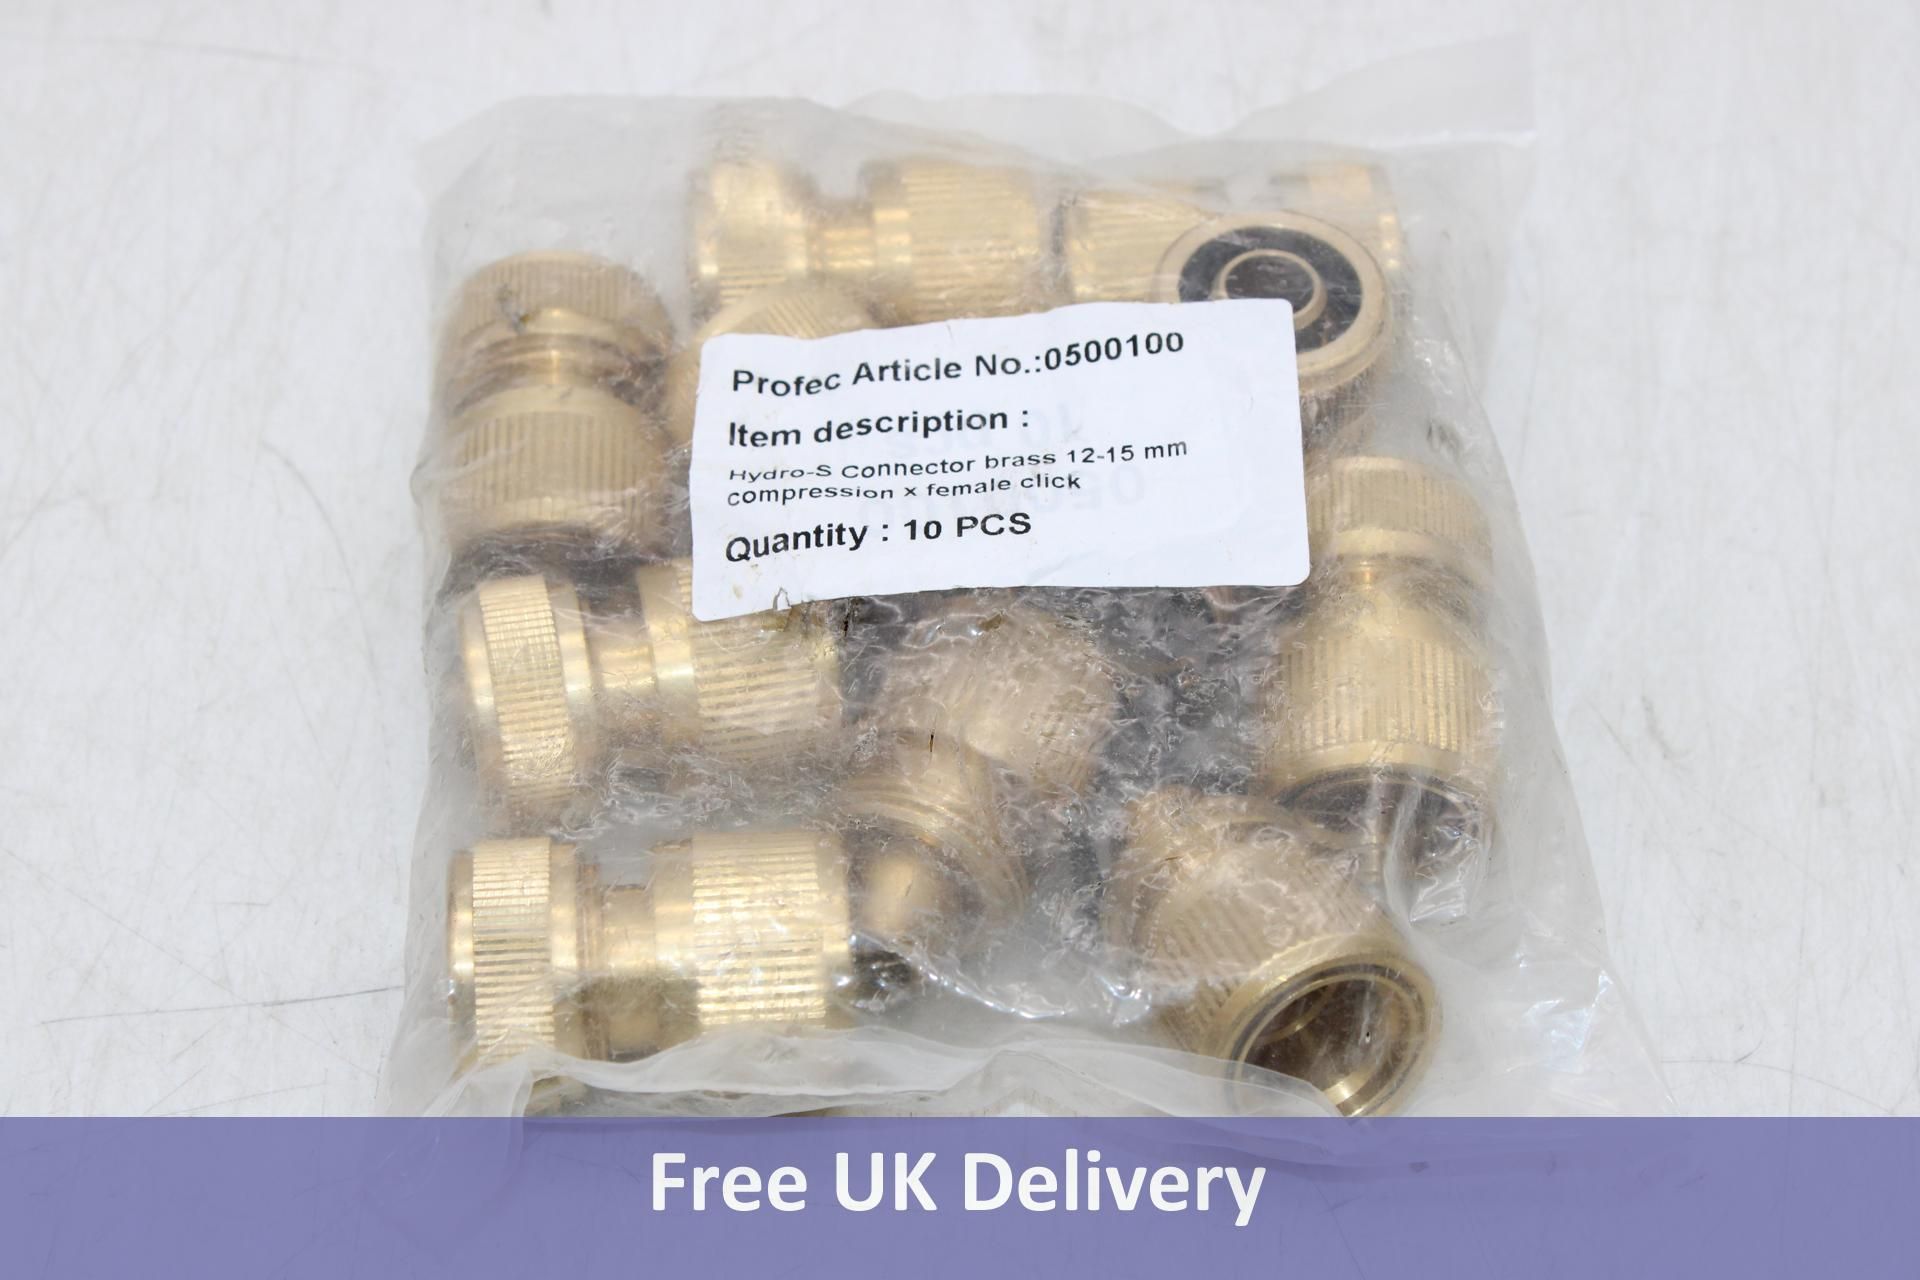 Sixty Hydro S Connectors, Brass, 12-15mm, Compression X Female Click